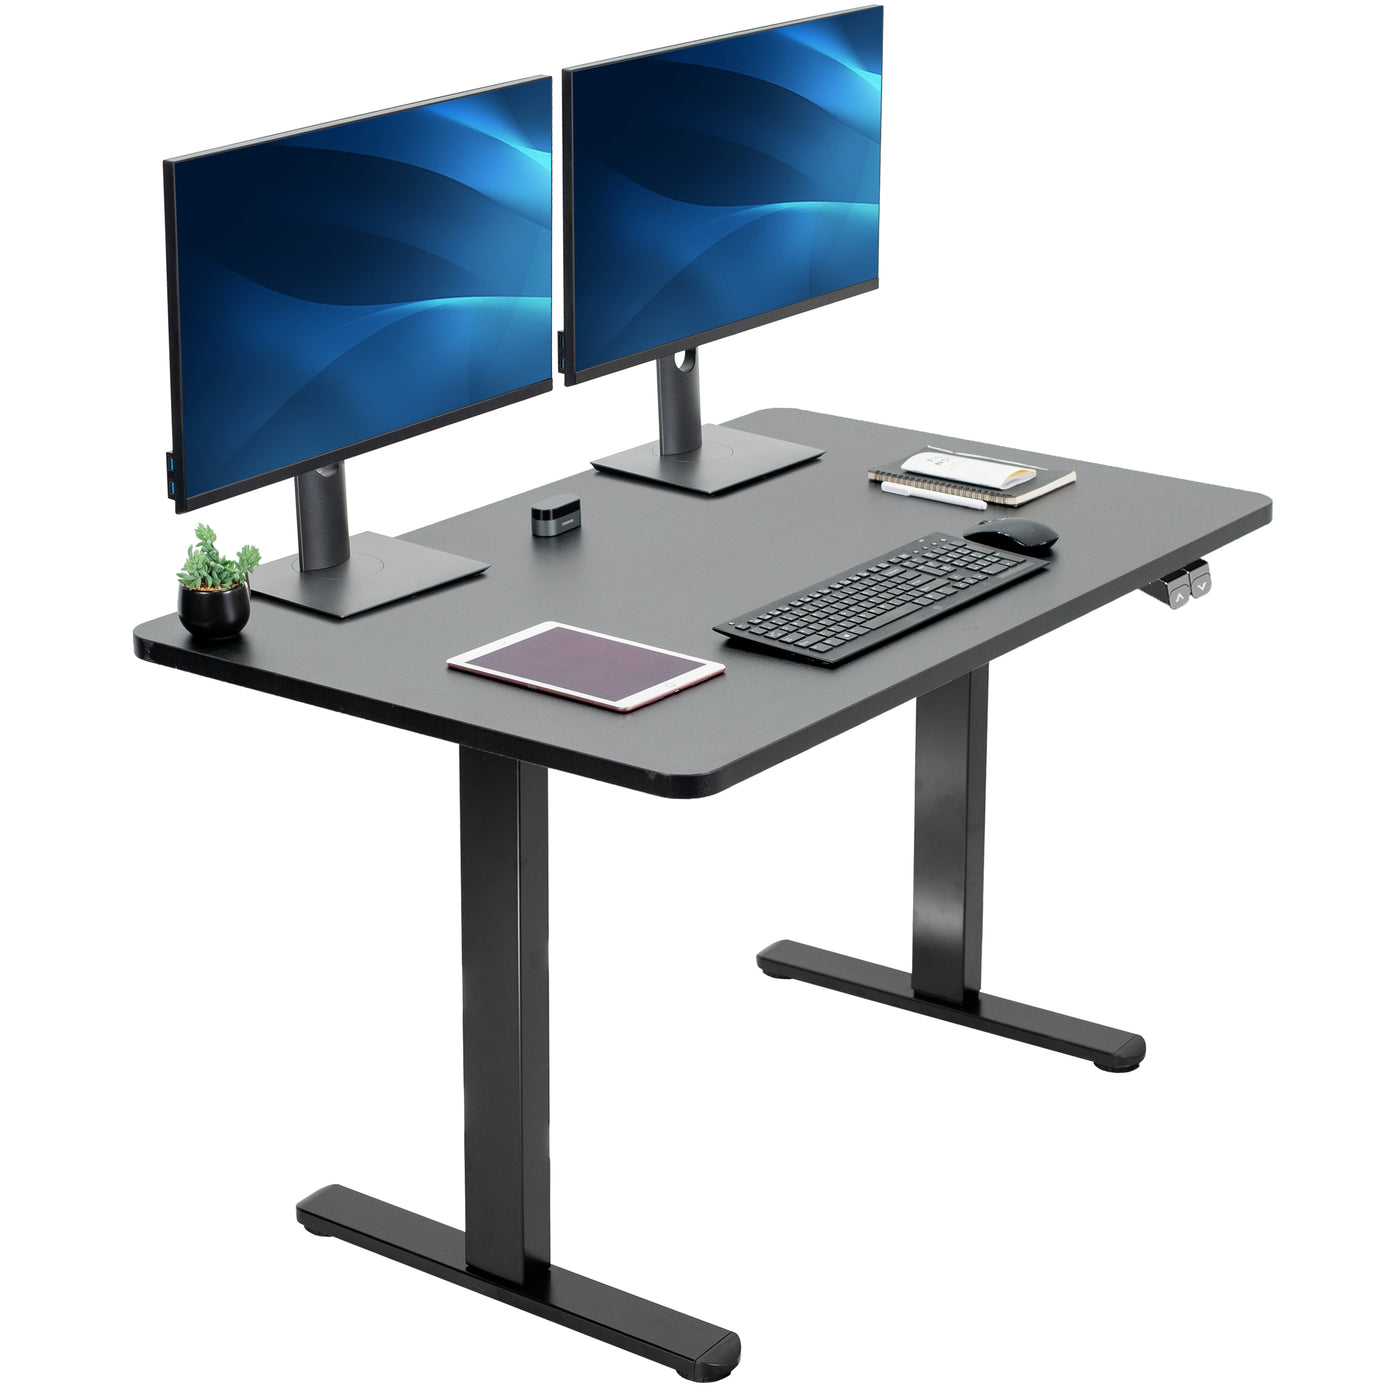 Compact heavy-duty electric height adjustable desktop workstation from VIVO.